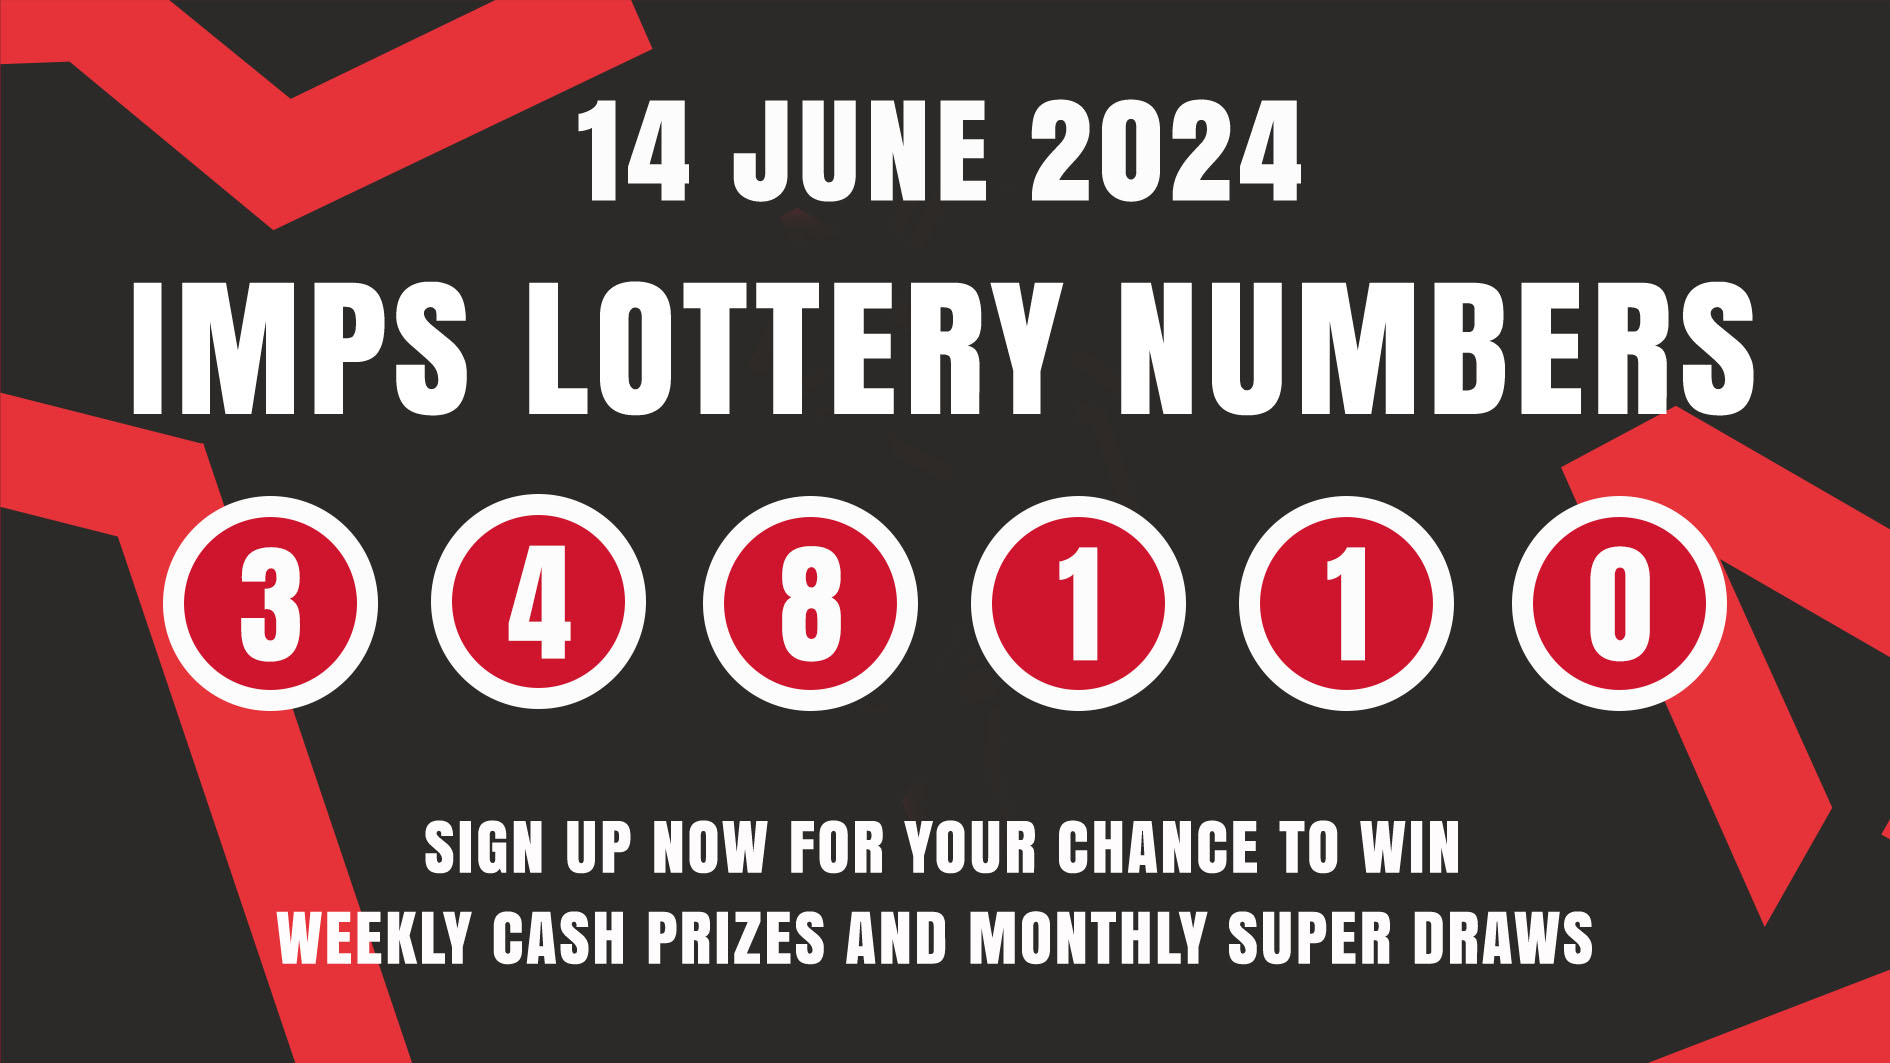 Imps Lottery Numbers - 14 June 2024